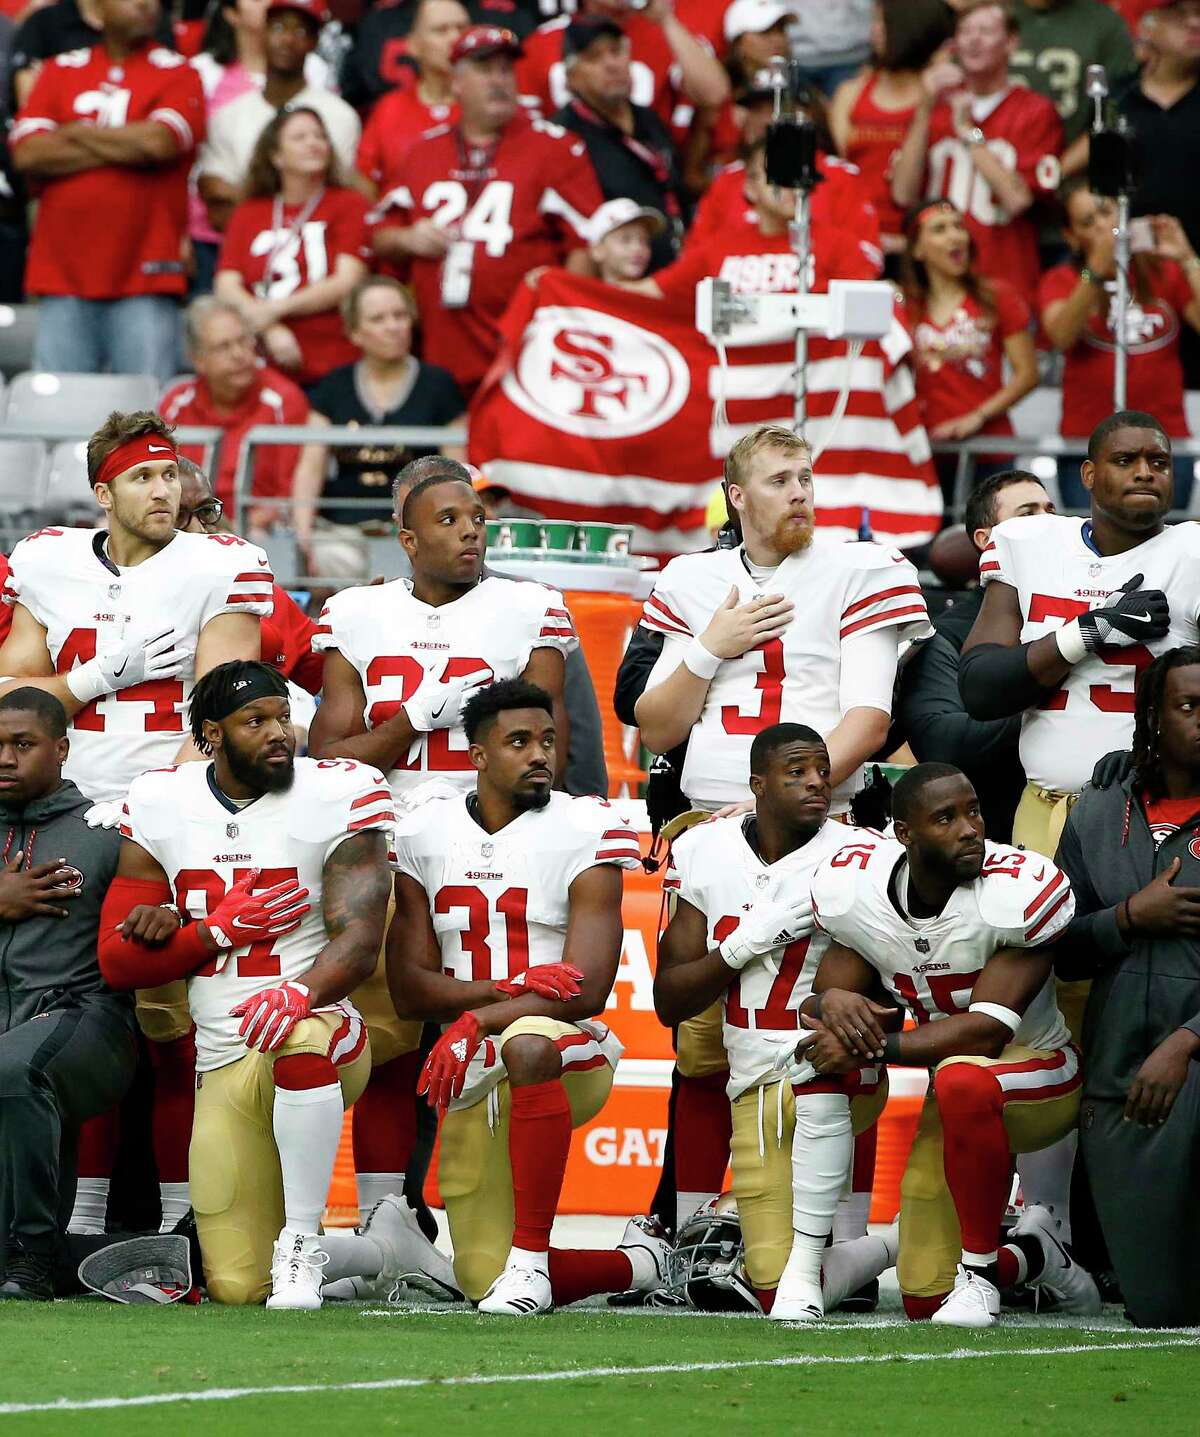 Some members of the San Francisco 49ers kneel as others stand during the national anthem prior to a game against the Cardinals in Glendale, Ariz.